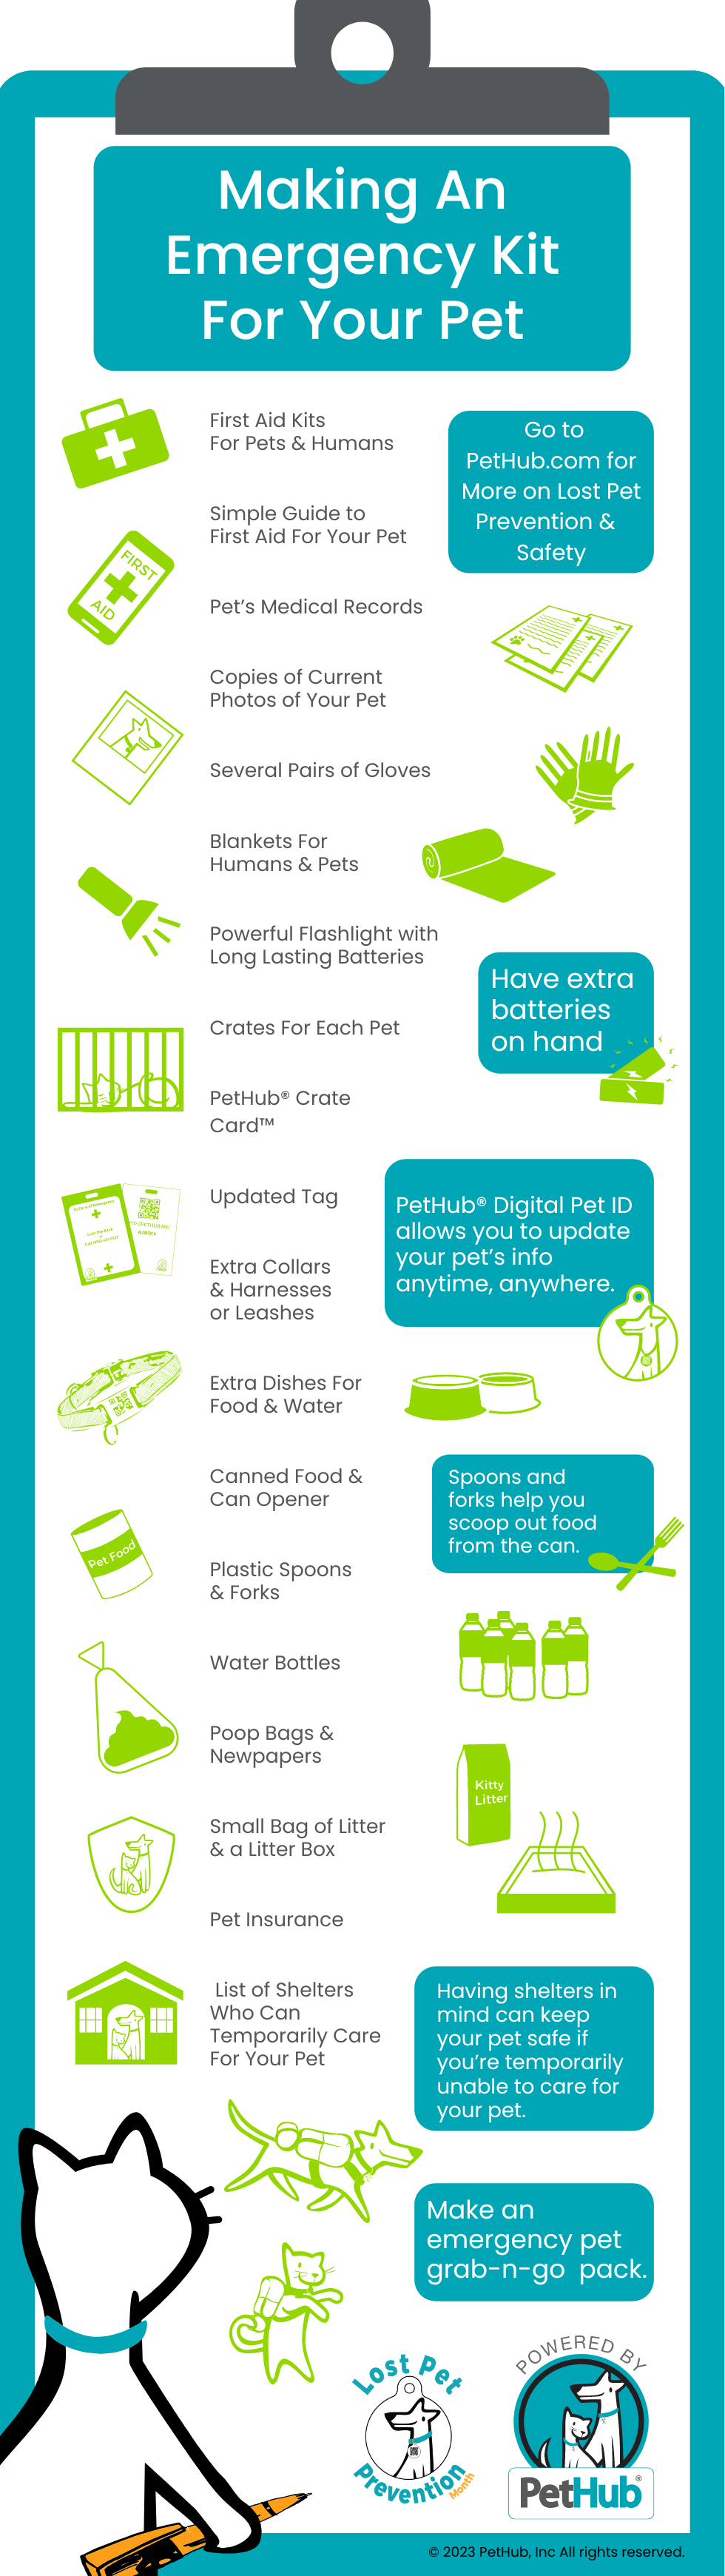 An infographic showing how to make an emergency grab-n-go kit for your pet.